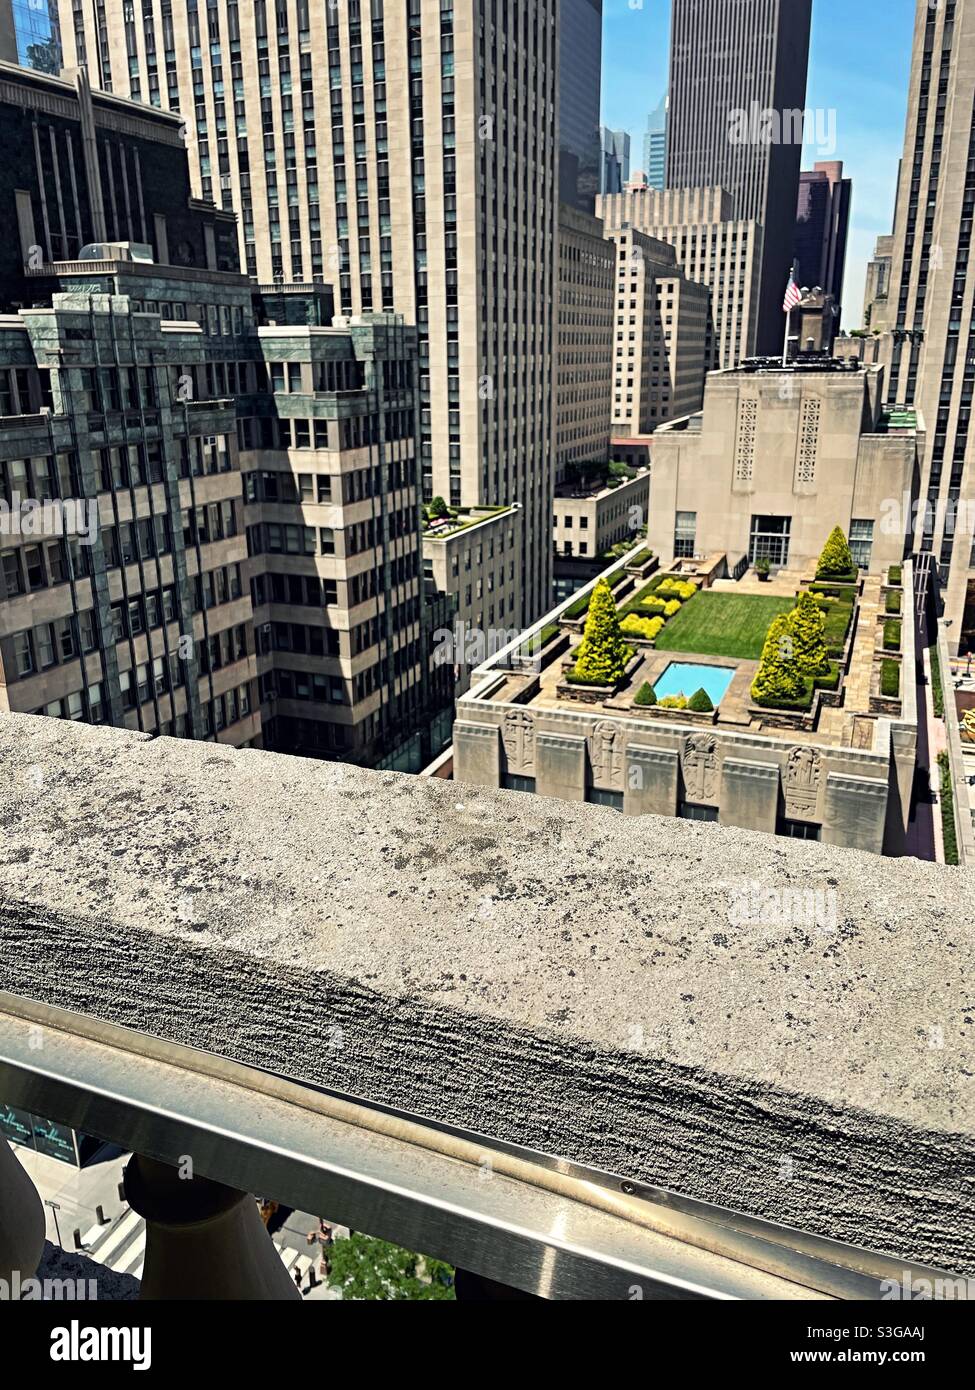 A formal English landscaped garden on top of a building at Rockefeller Center as seen from a balcony at Saks Fifth Avenue across 5th Ave., NYC, USA Stock Photo